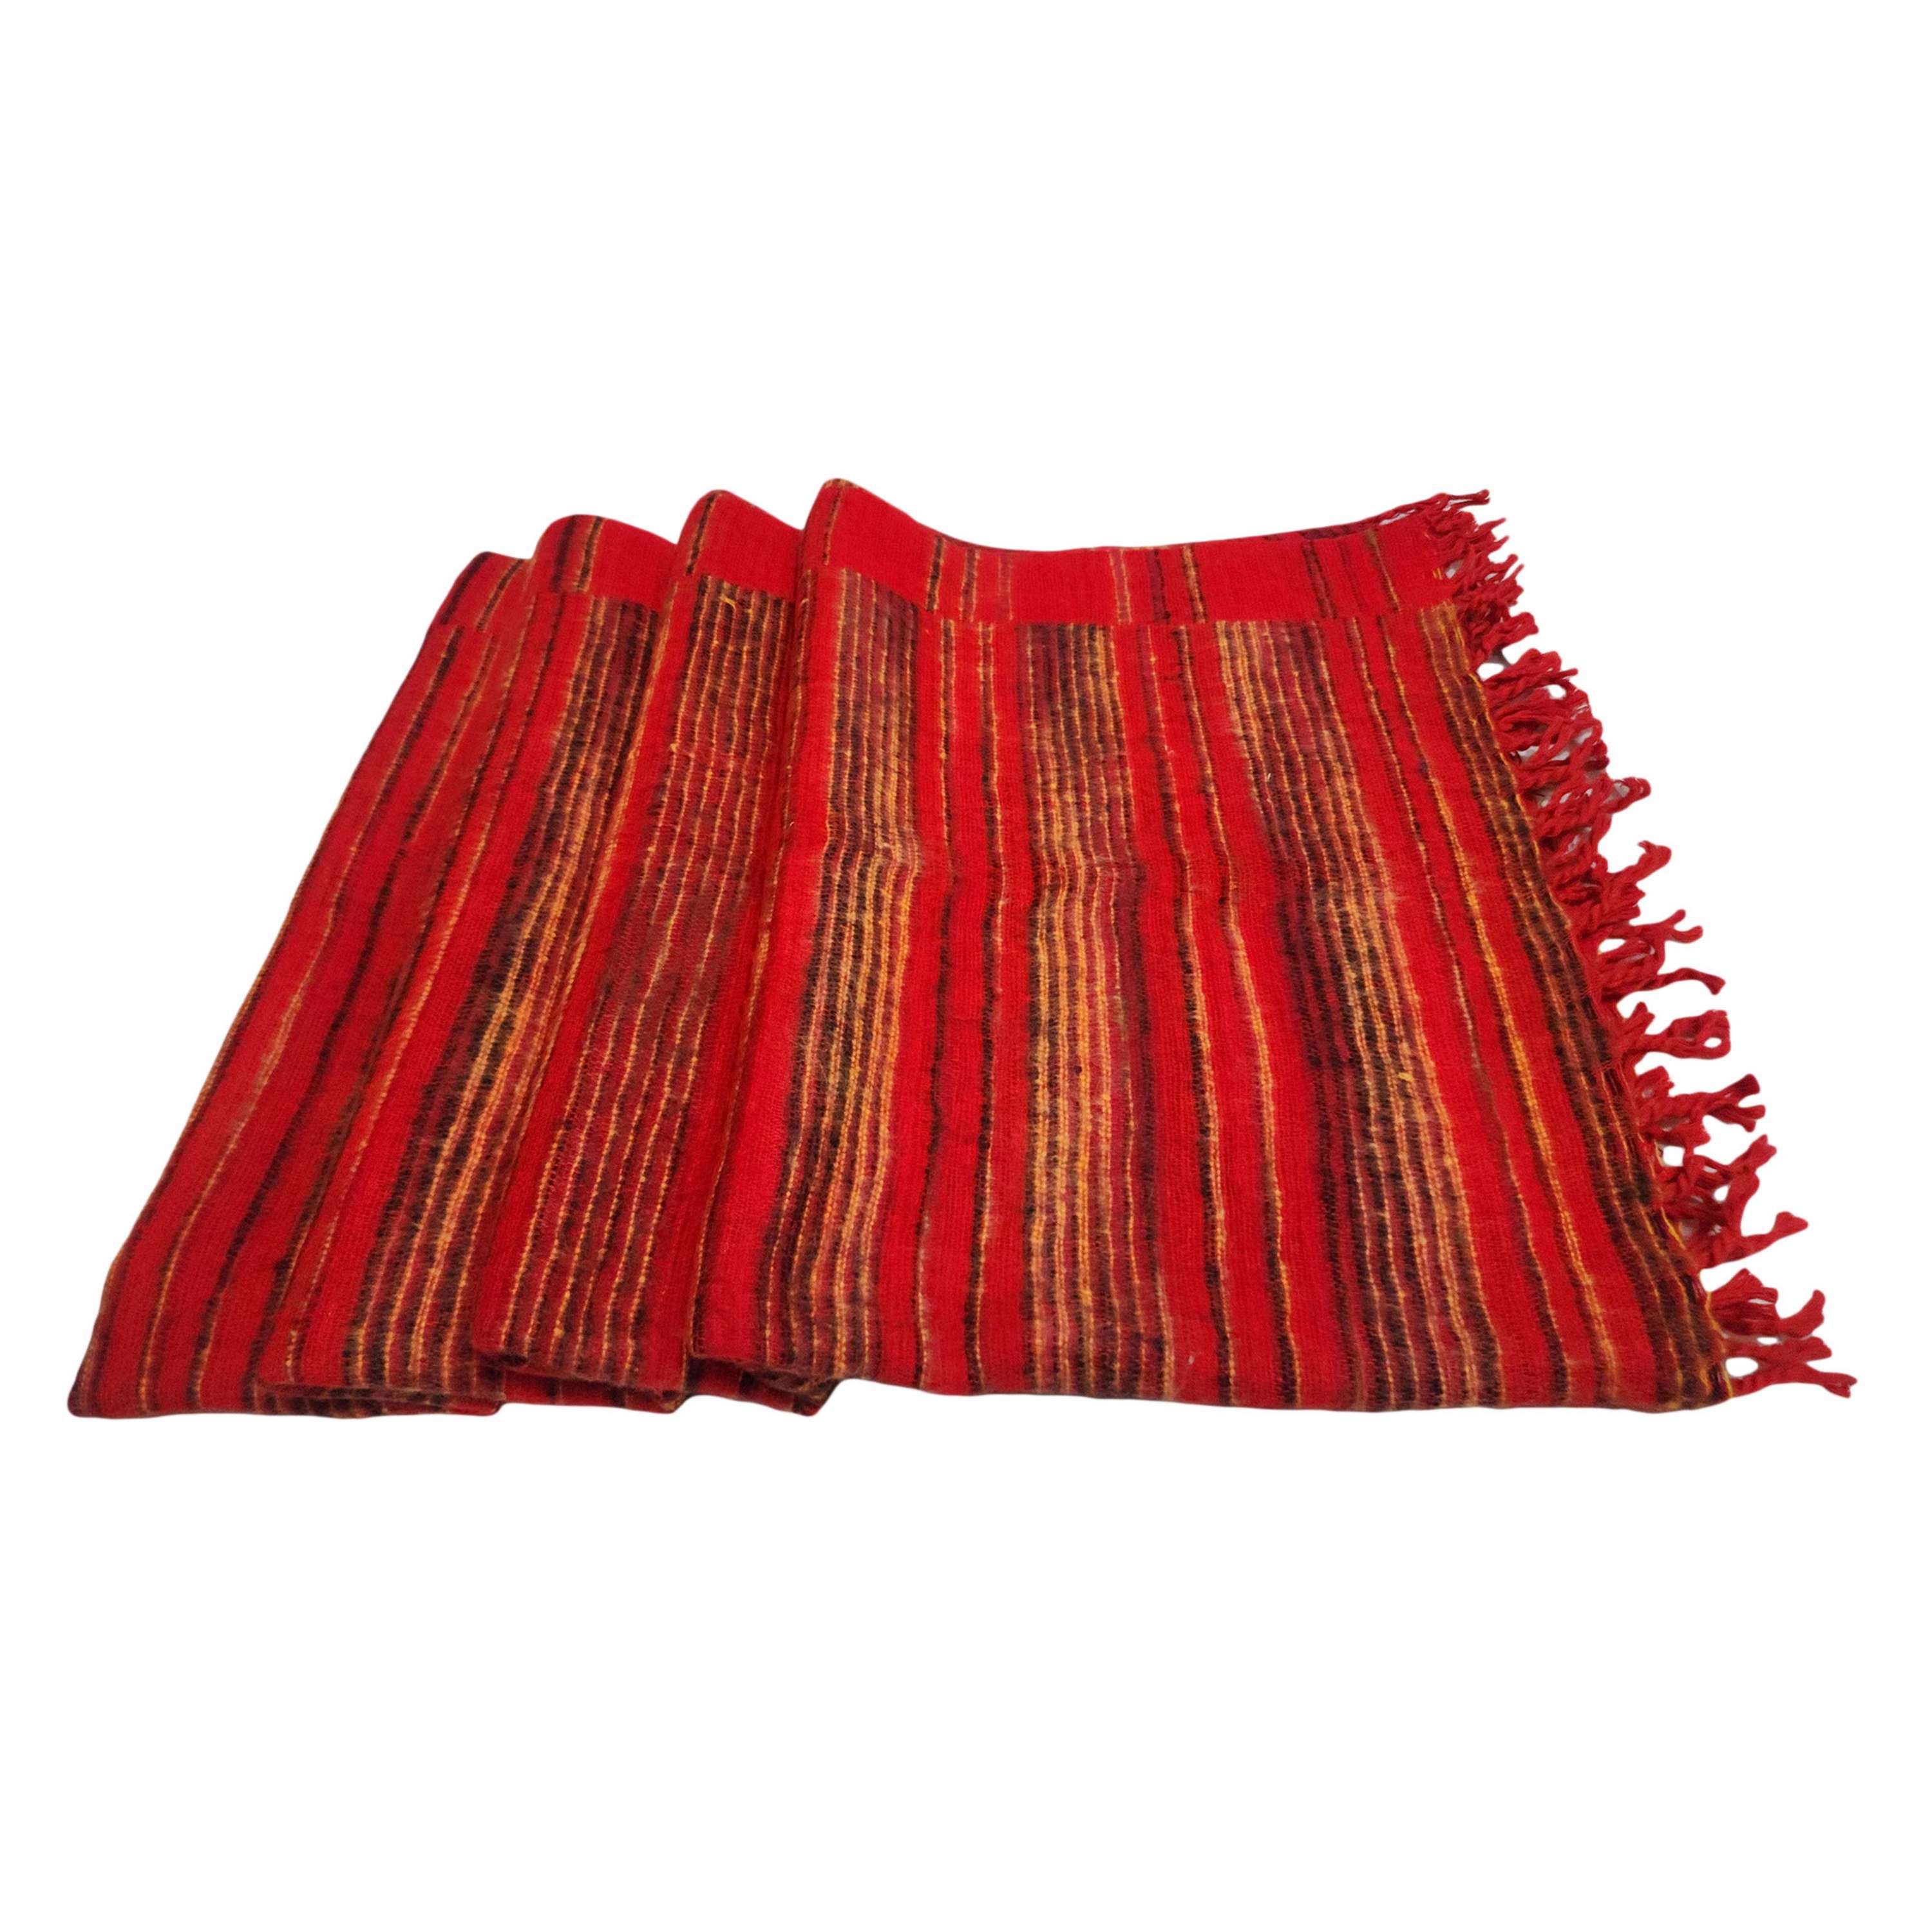 Tibet Shawl, Durable Elegance: Acrylic Woolen Shawls For All Seasons In Crimson Color And Stripes